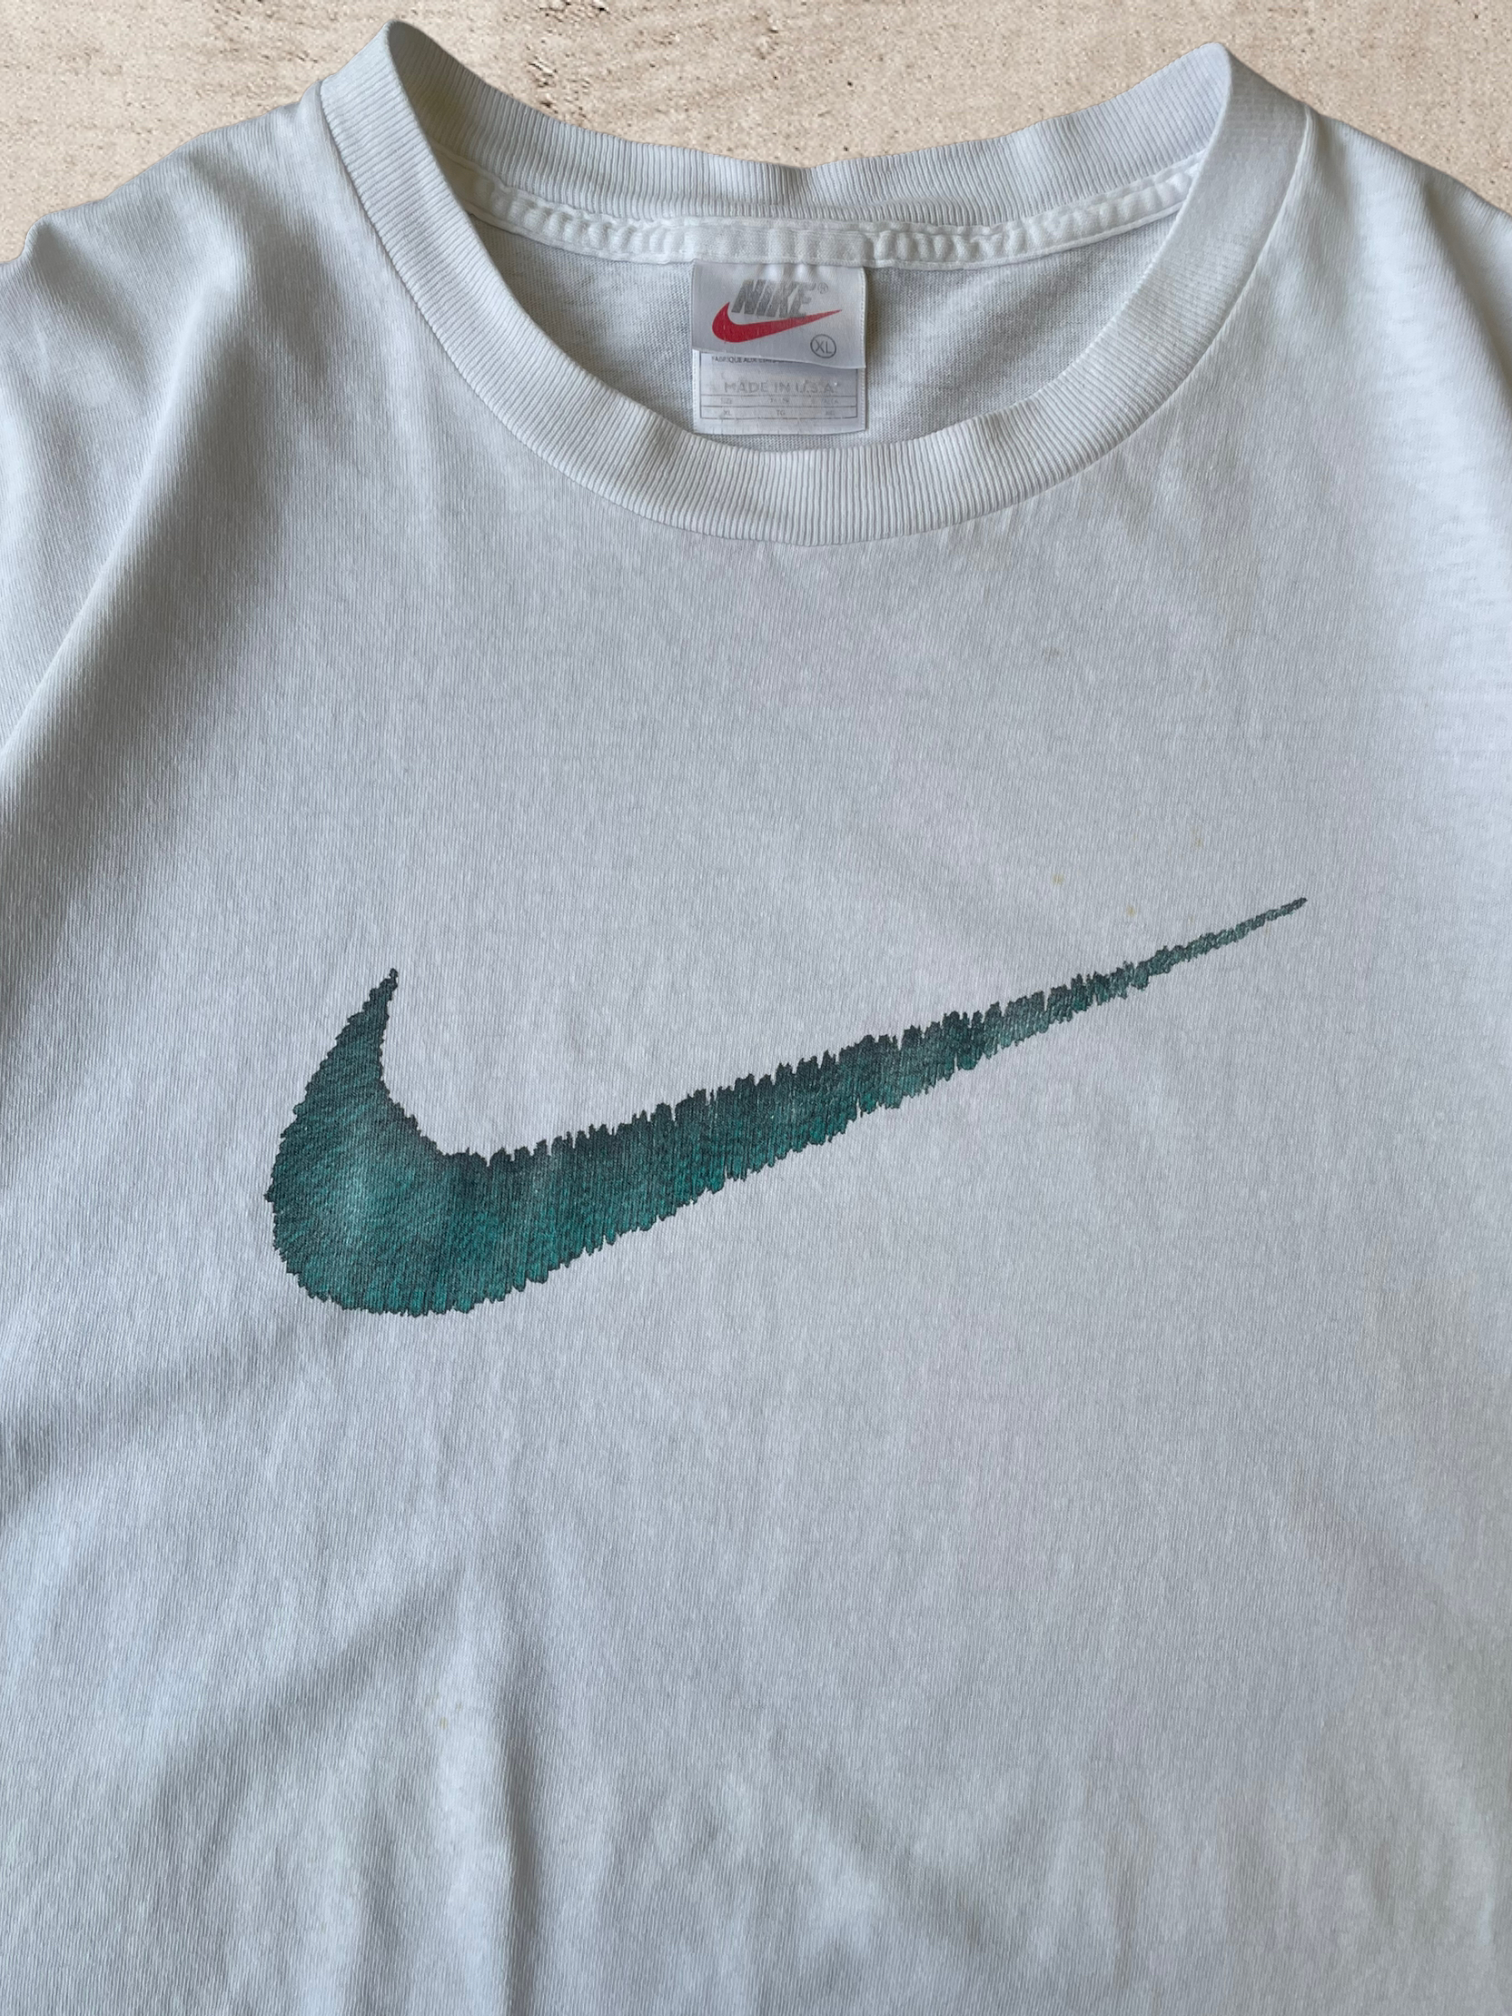 90s Nike Graphic T-Shirt - X-Large